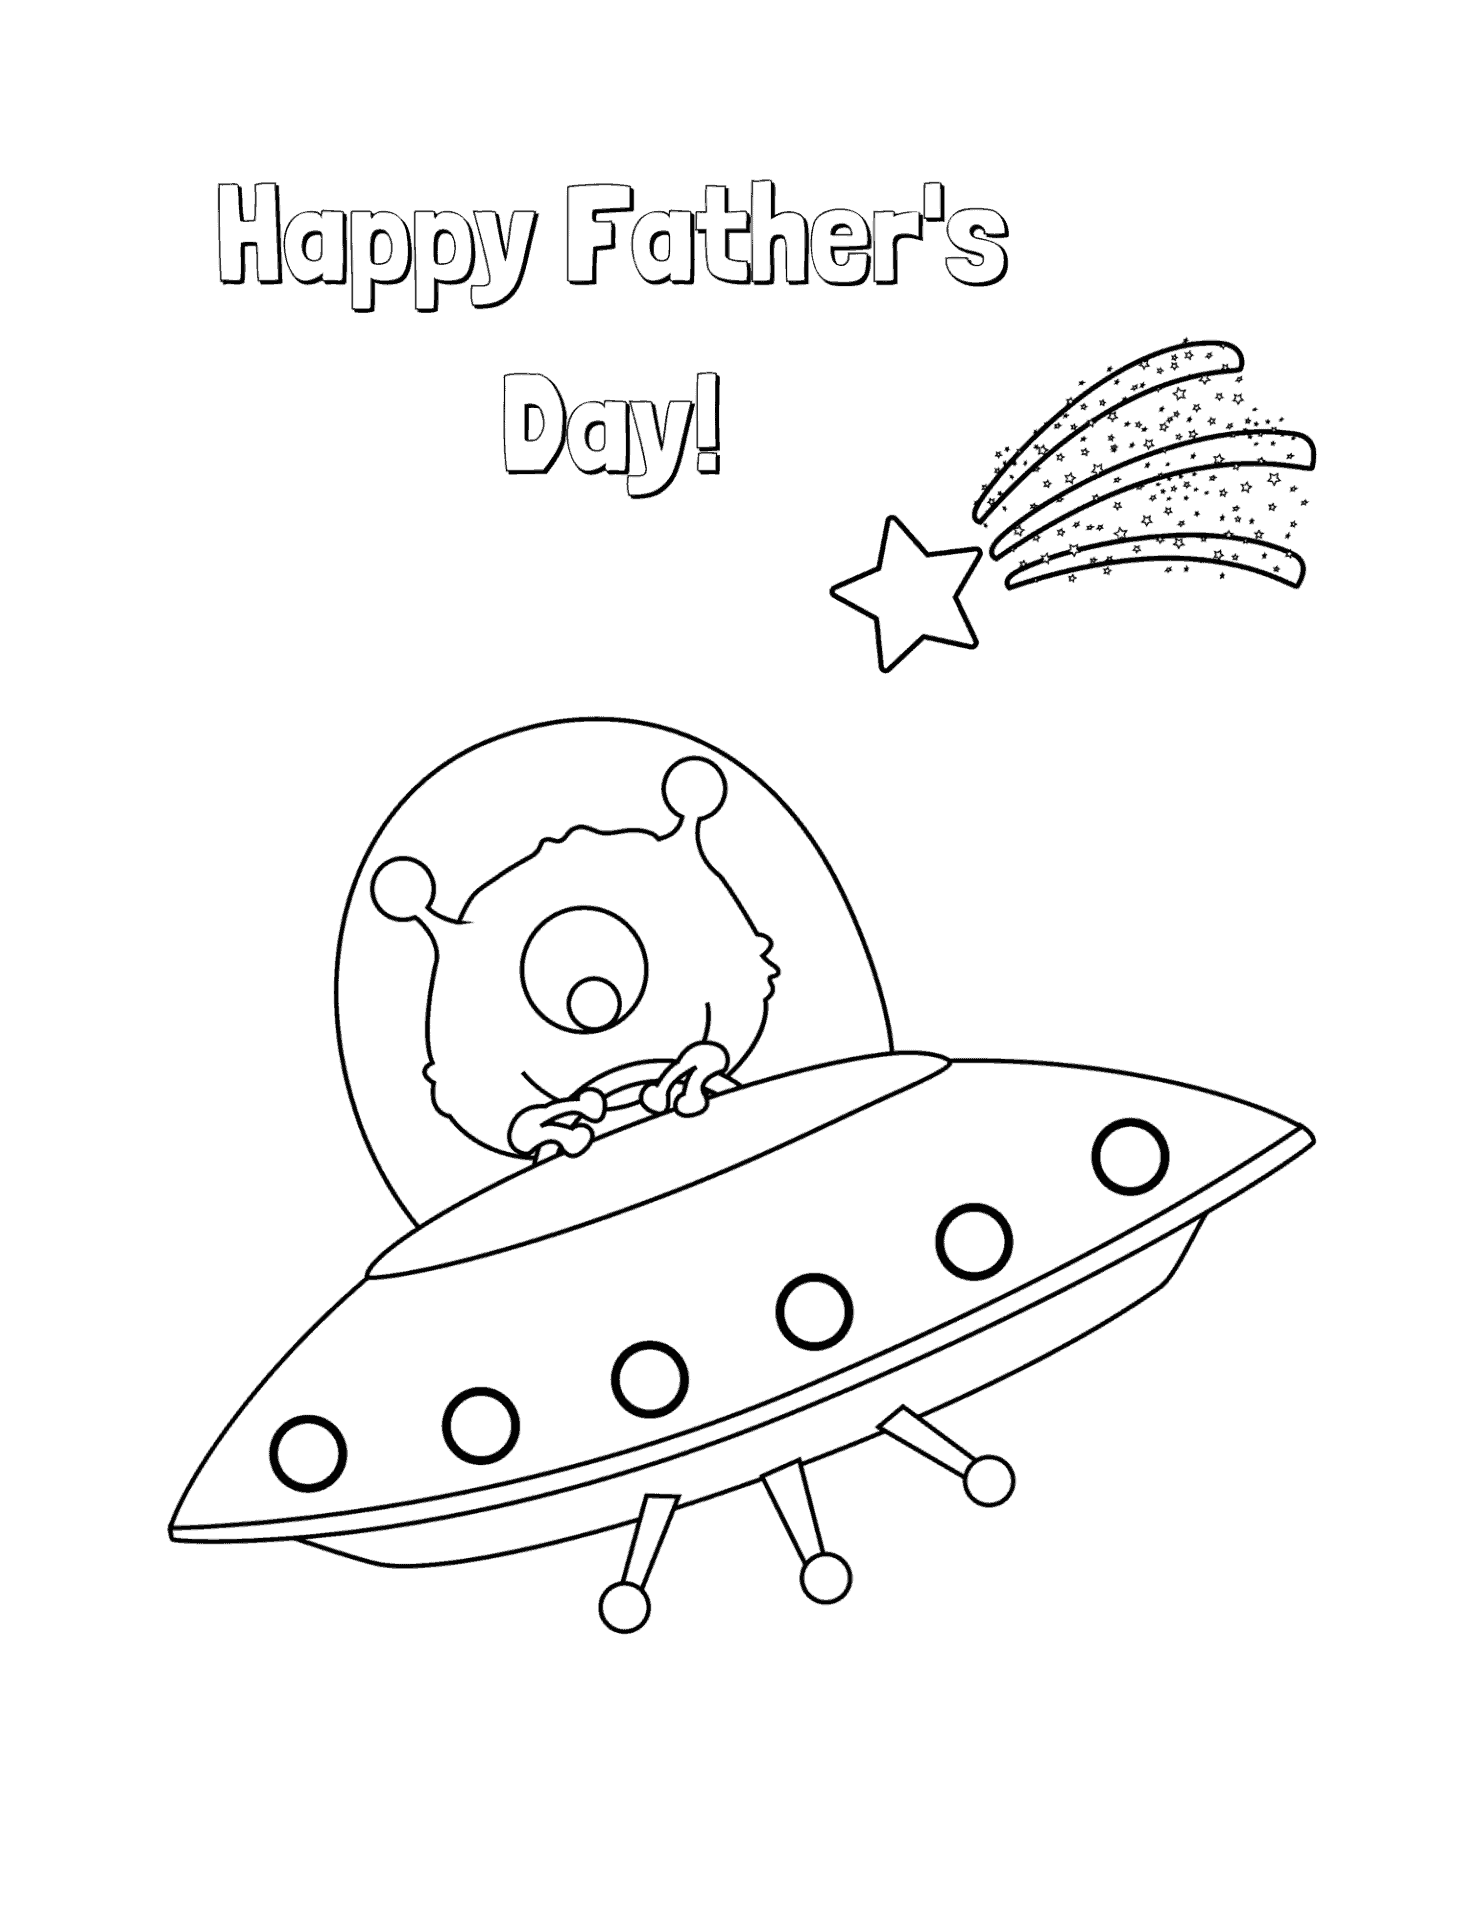 7 Free Father's Day Coloring Pages | Printable | Preschool and Up